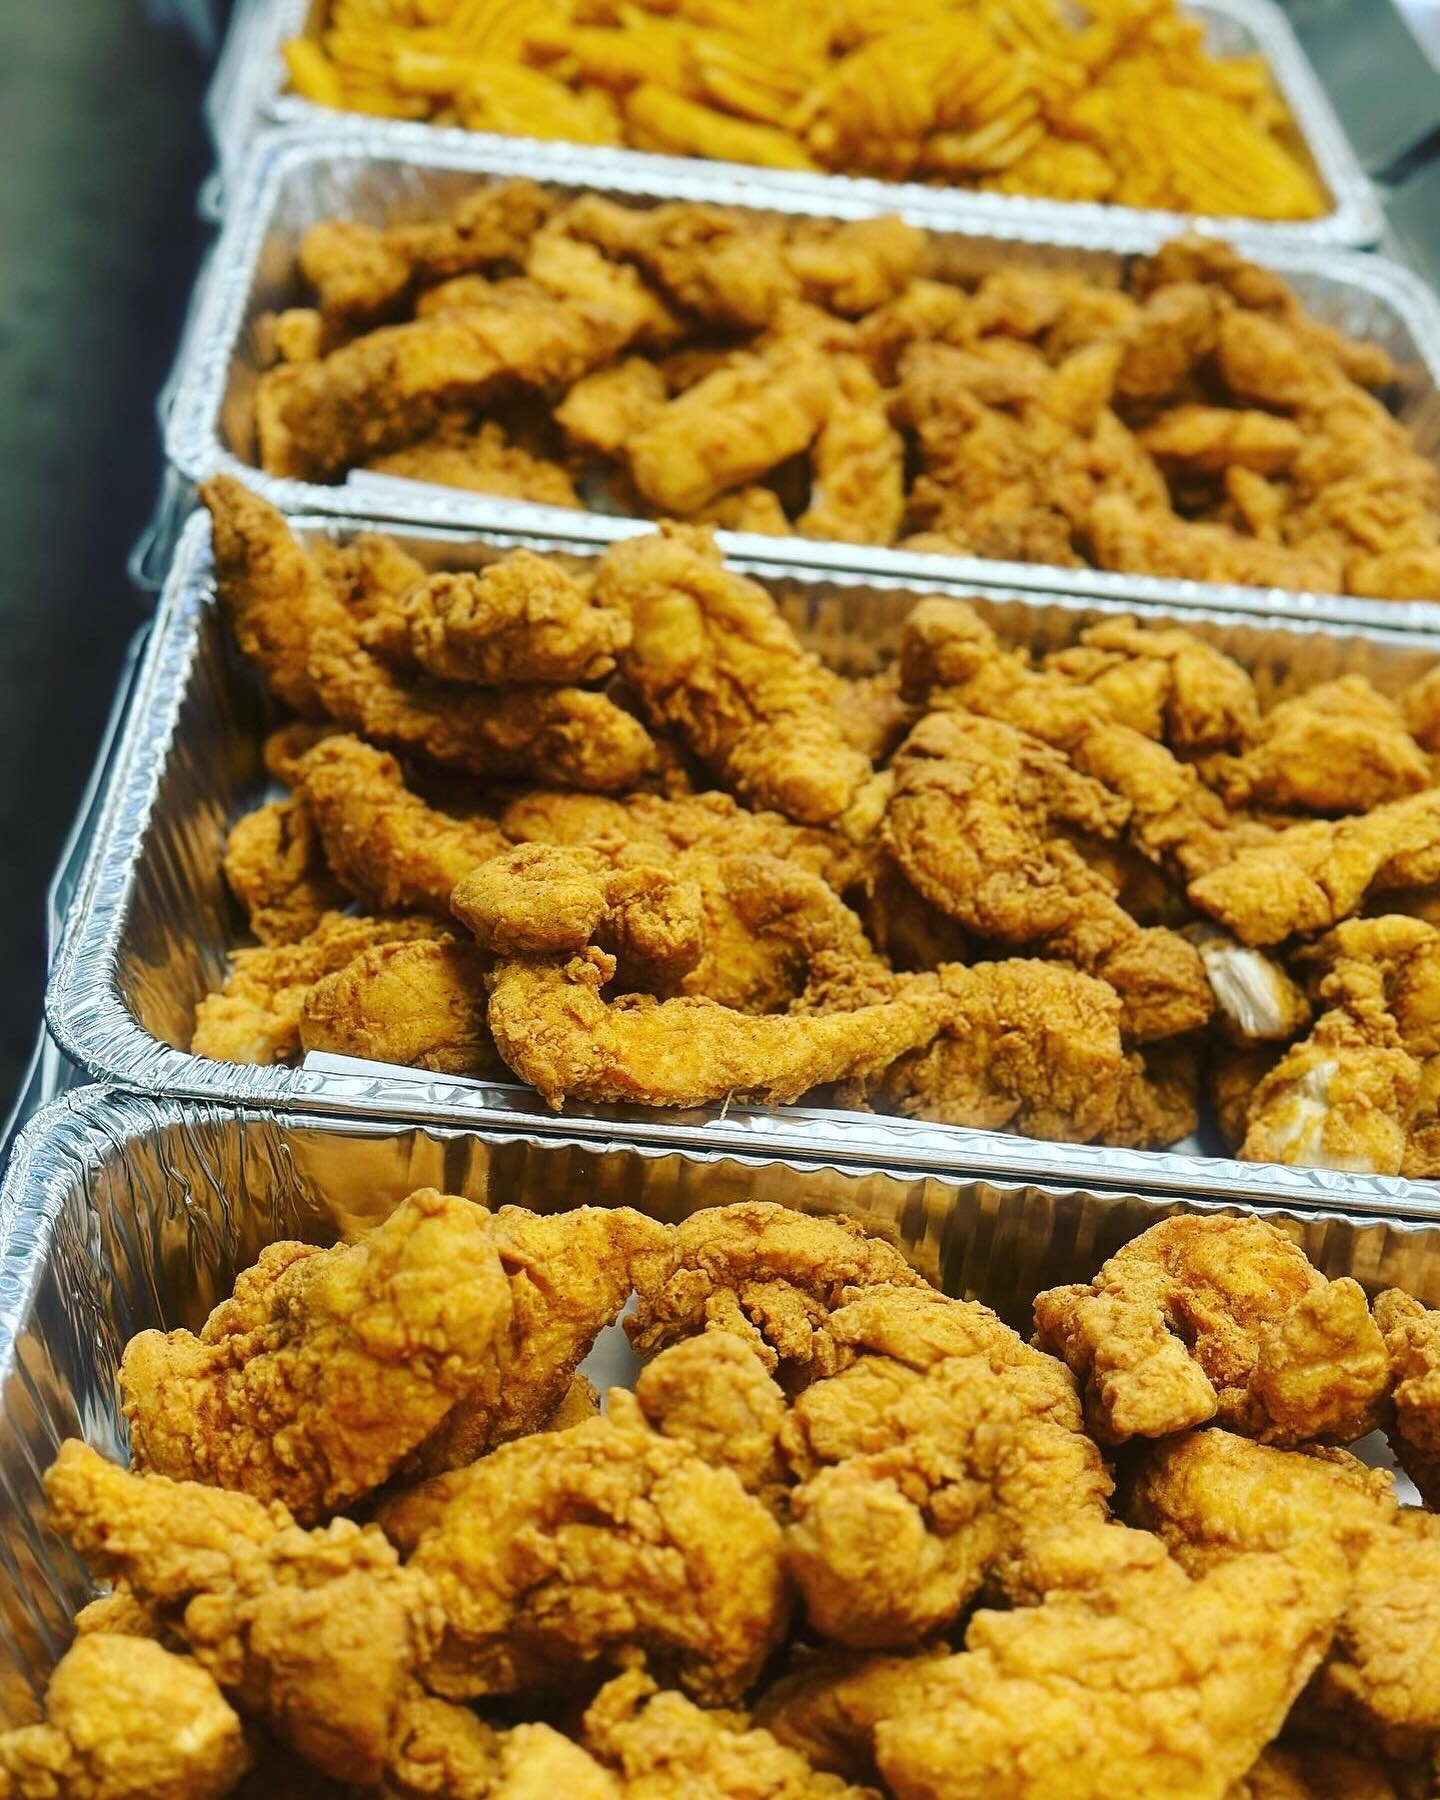 WE HAVE GOT YOU COVERED FOR THE NATIONAL CHAMPIONSHIP GAME TONIGHT. Let us cater your watch party tonight with our fresh and amazing food options. From options like our Jumbo Chicken Tenders, Tossed Wing Dings, Hand Tossed Pizza, and much more, you c